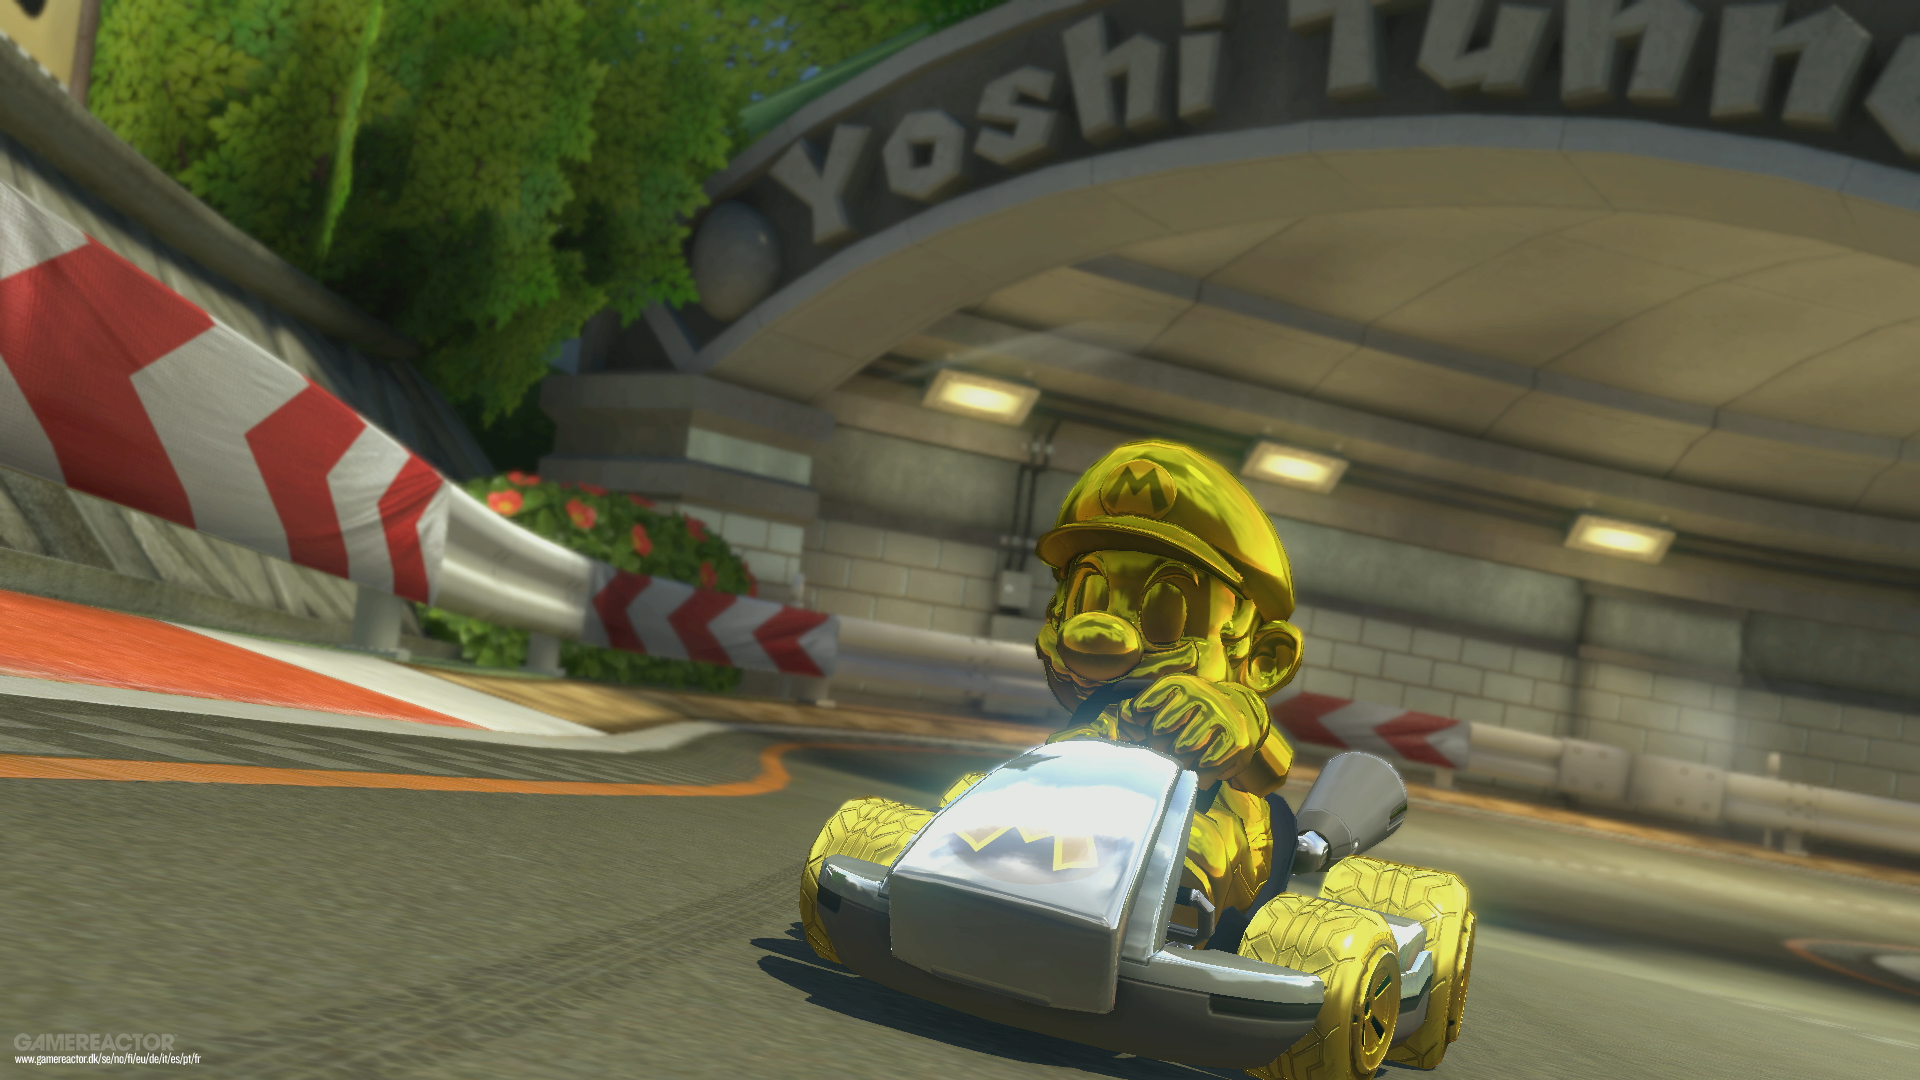 Mario Kart 8 Deluxe enters this exclusive list of “million sellers” in Spain